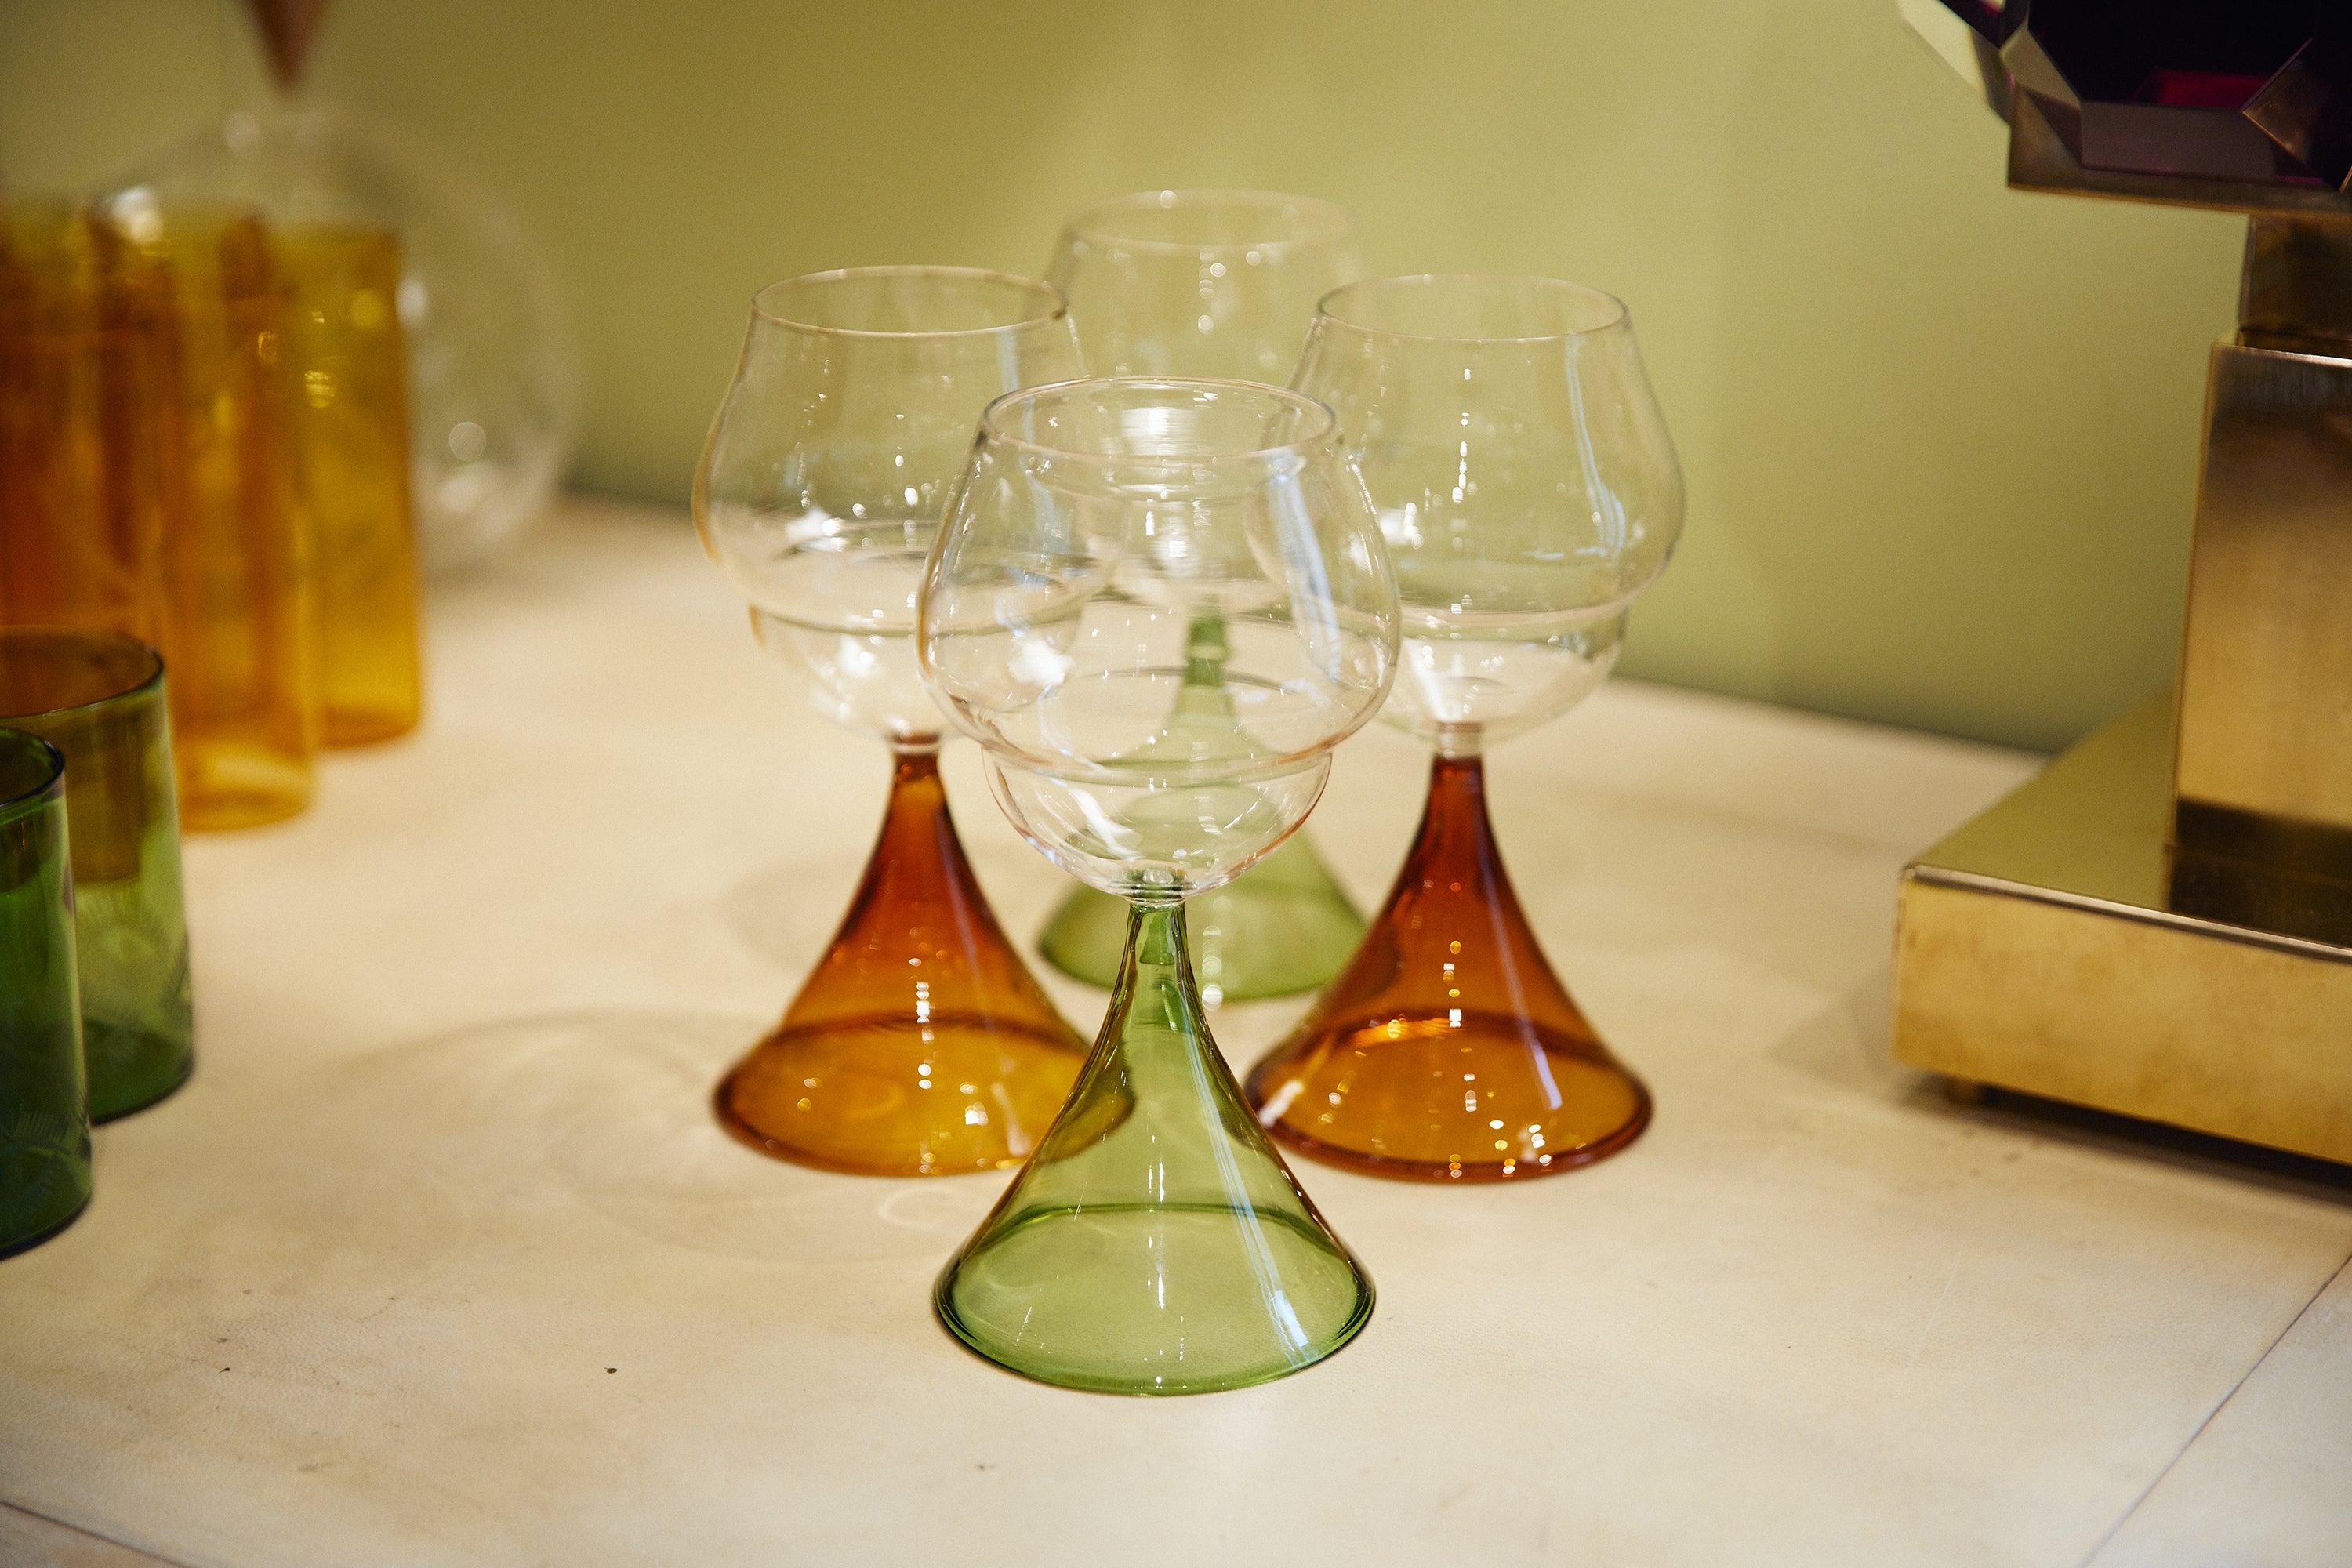 AMBER ROUNDED WINE GLASSES